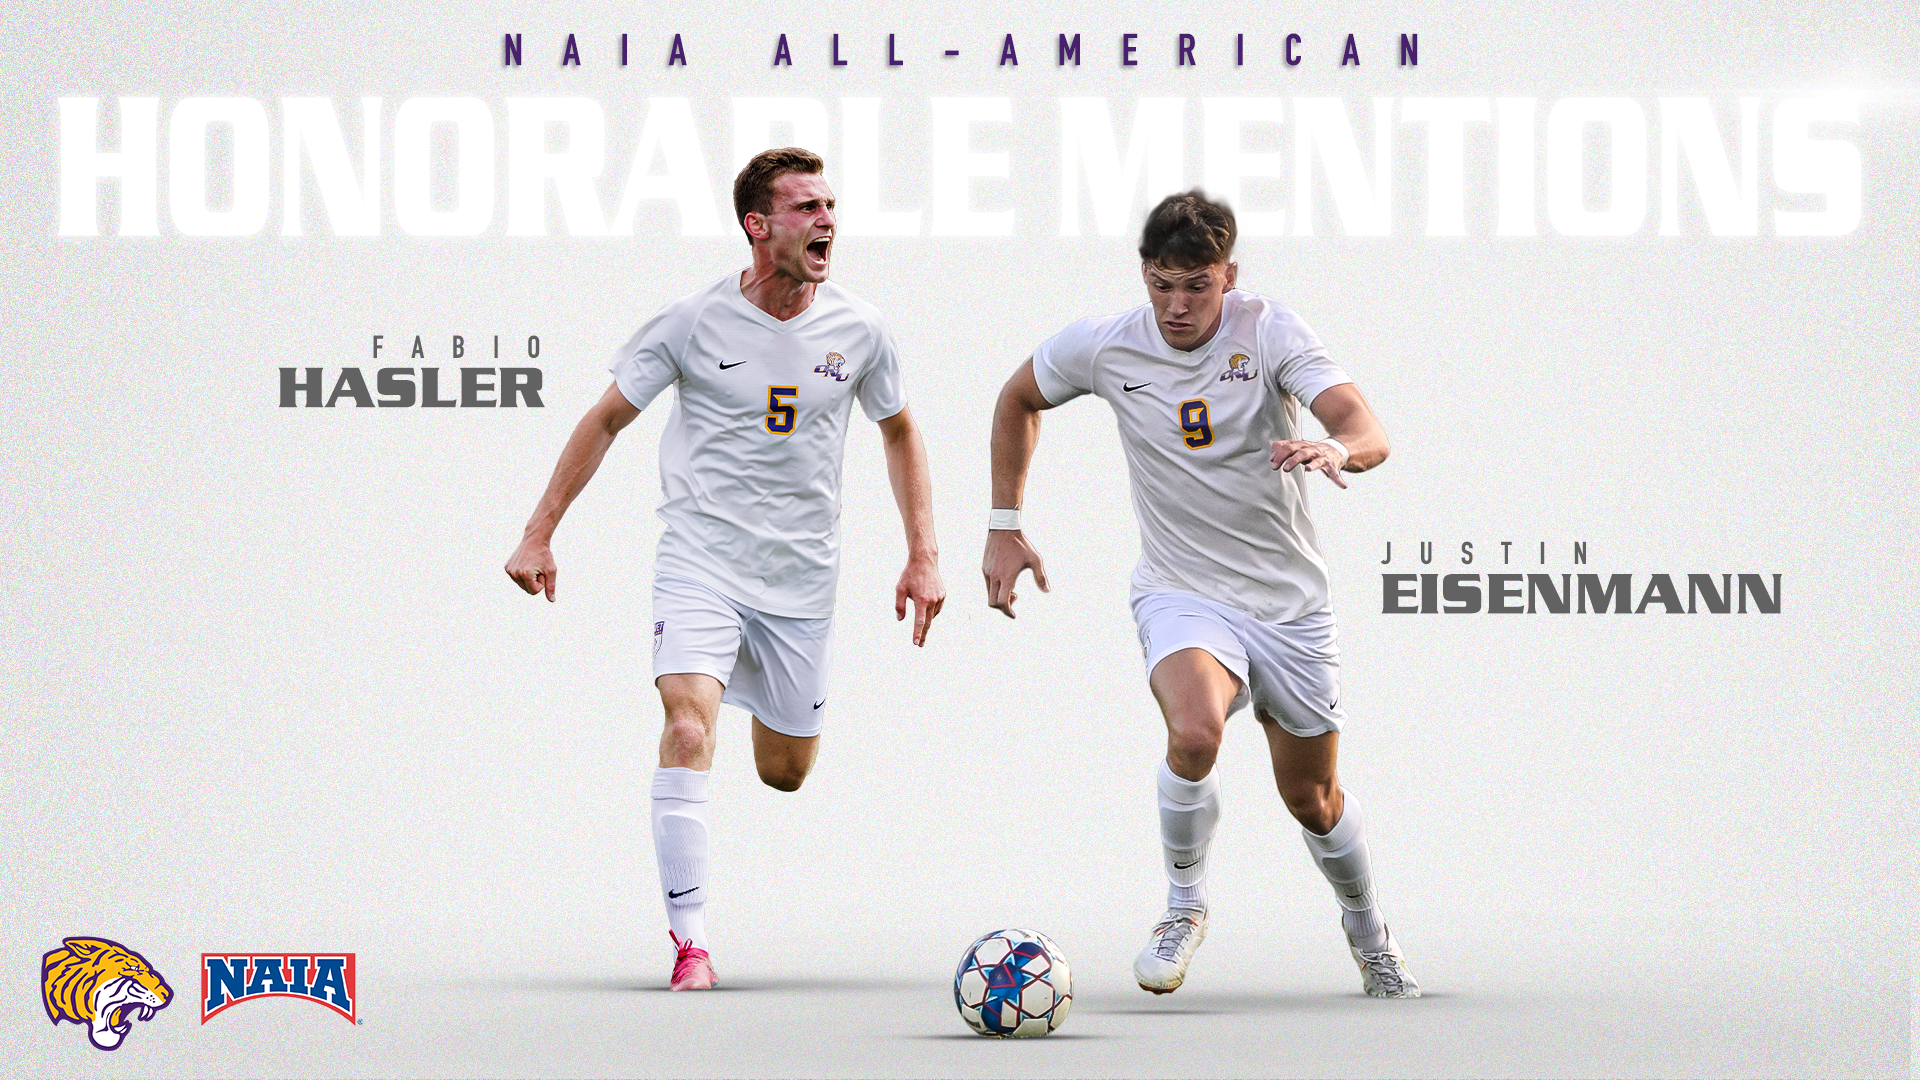 EISENMANN AND HASLER SELECTED AS NAIA ALL-AMERICA HONORABLE MENTIONS